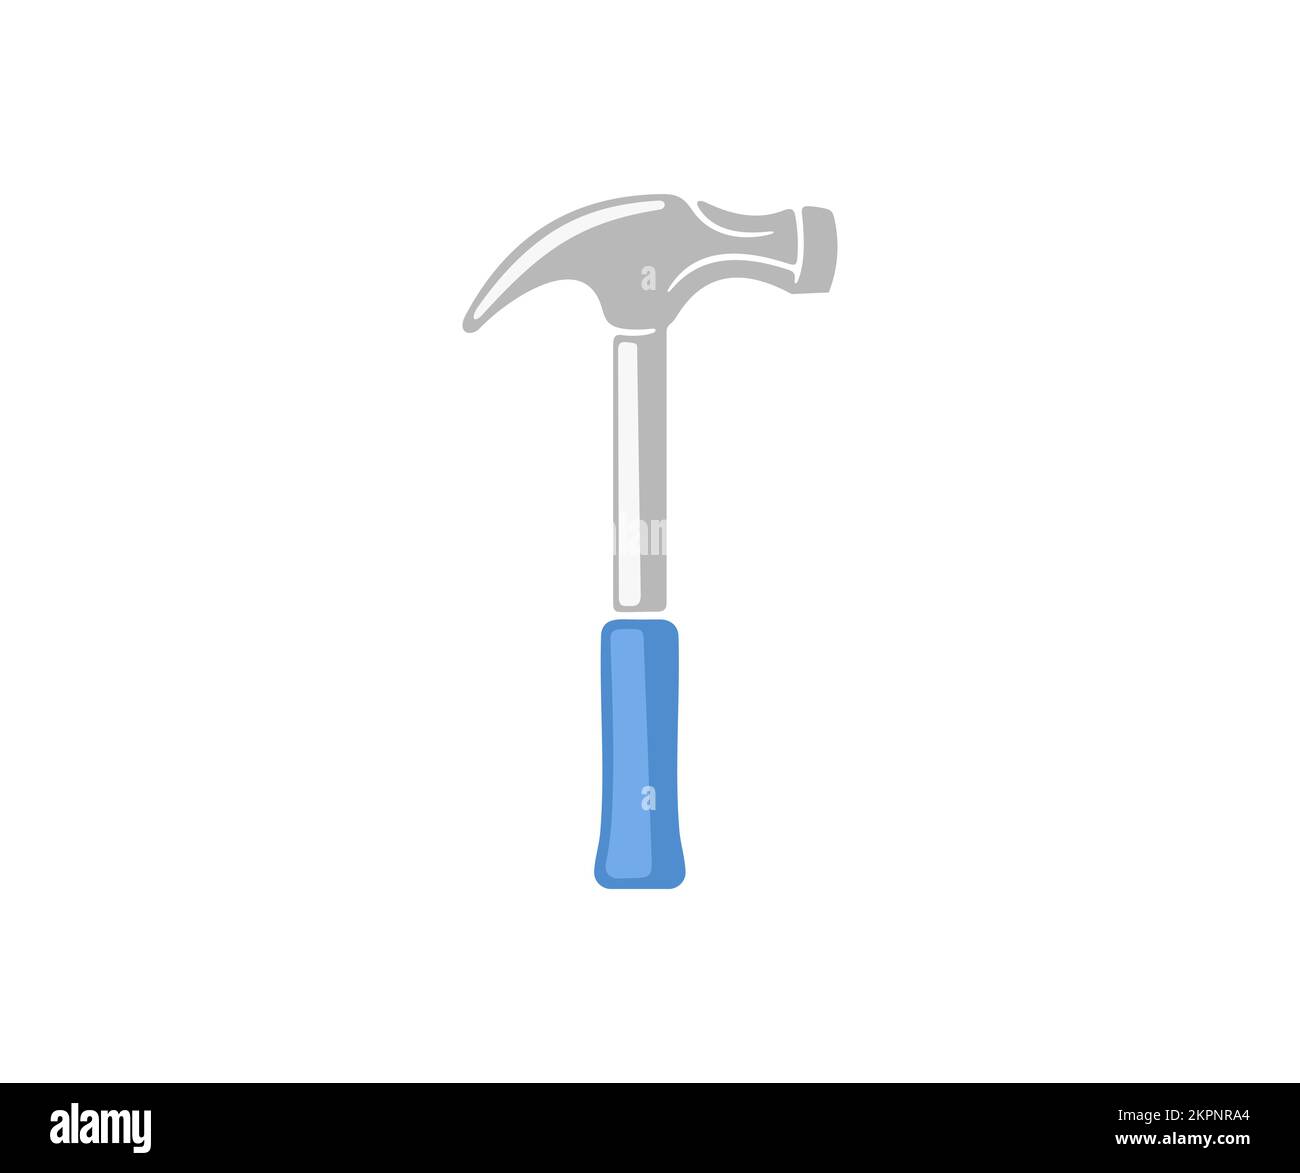 Hammer with a rubberized handle, tool, nail puller, carpenter and joiner's tool, graphic design. Work and construction tool, renovation, repair Stock Vector